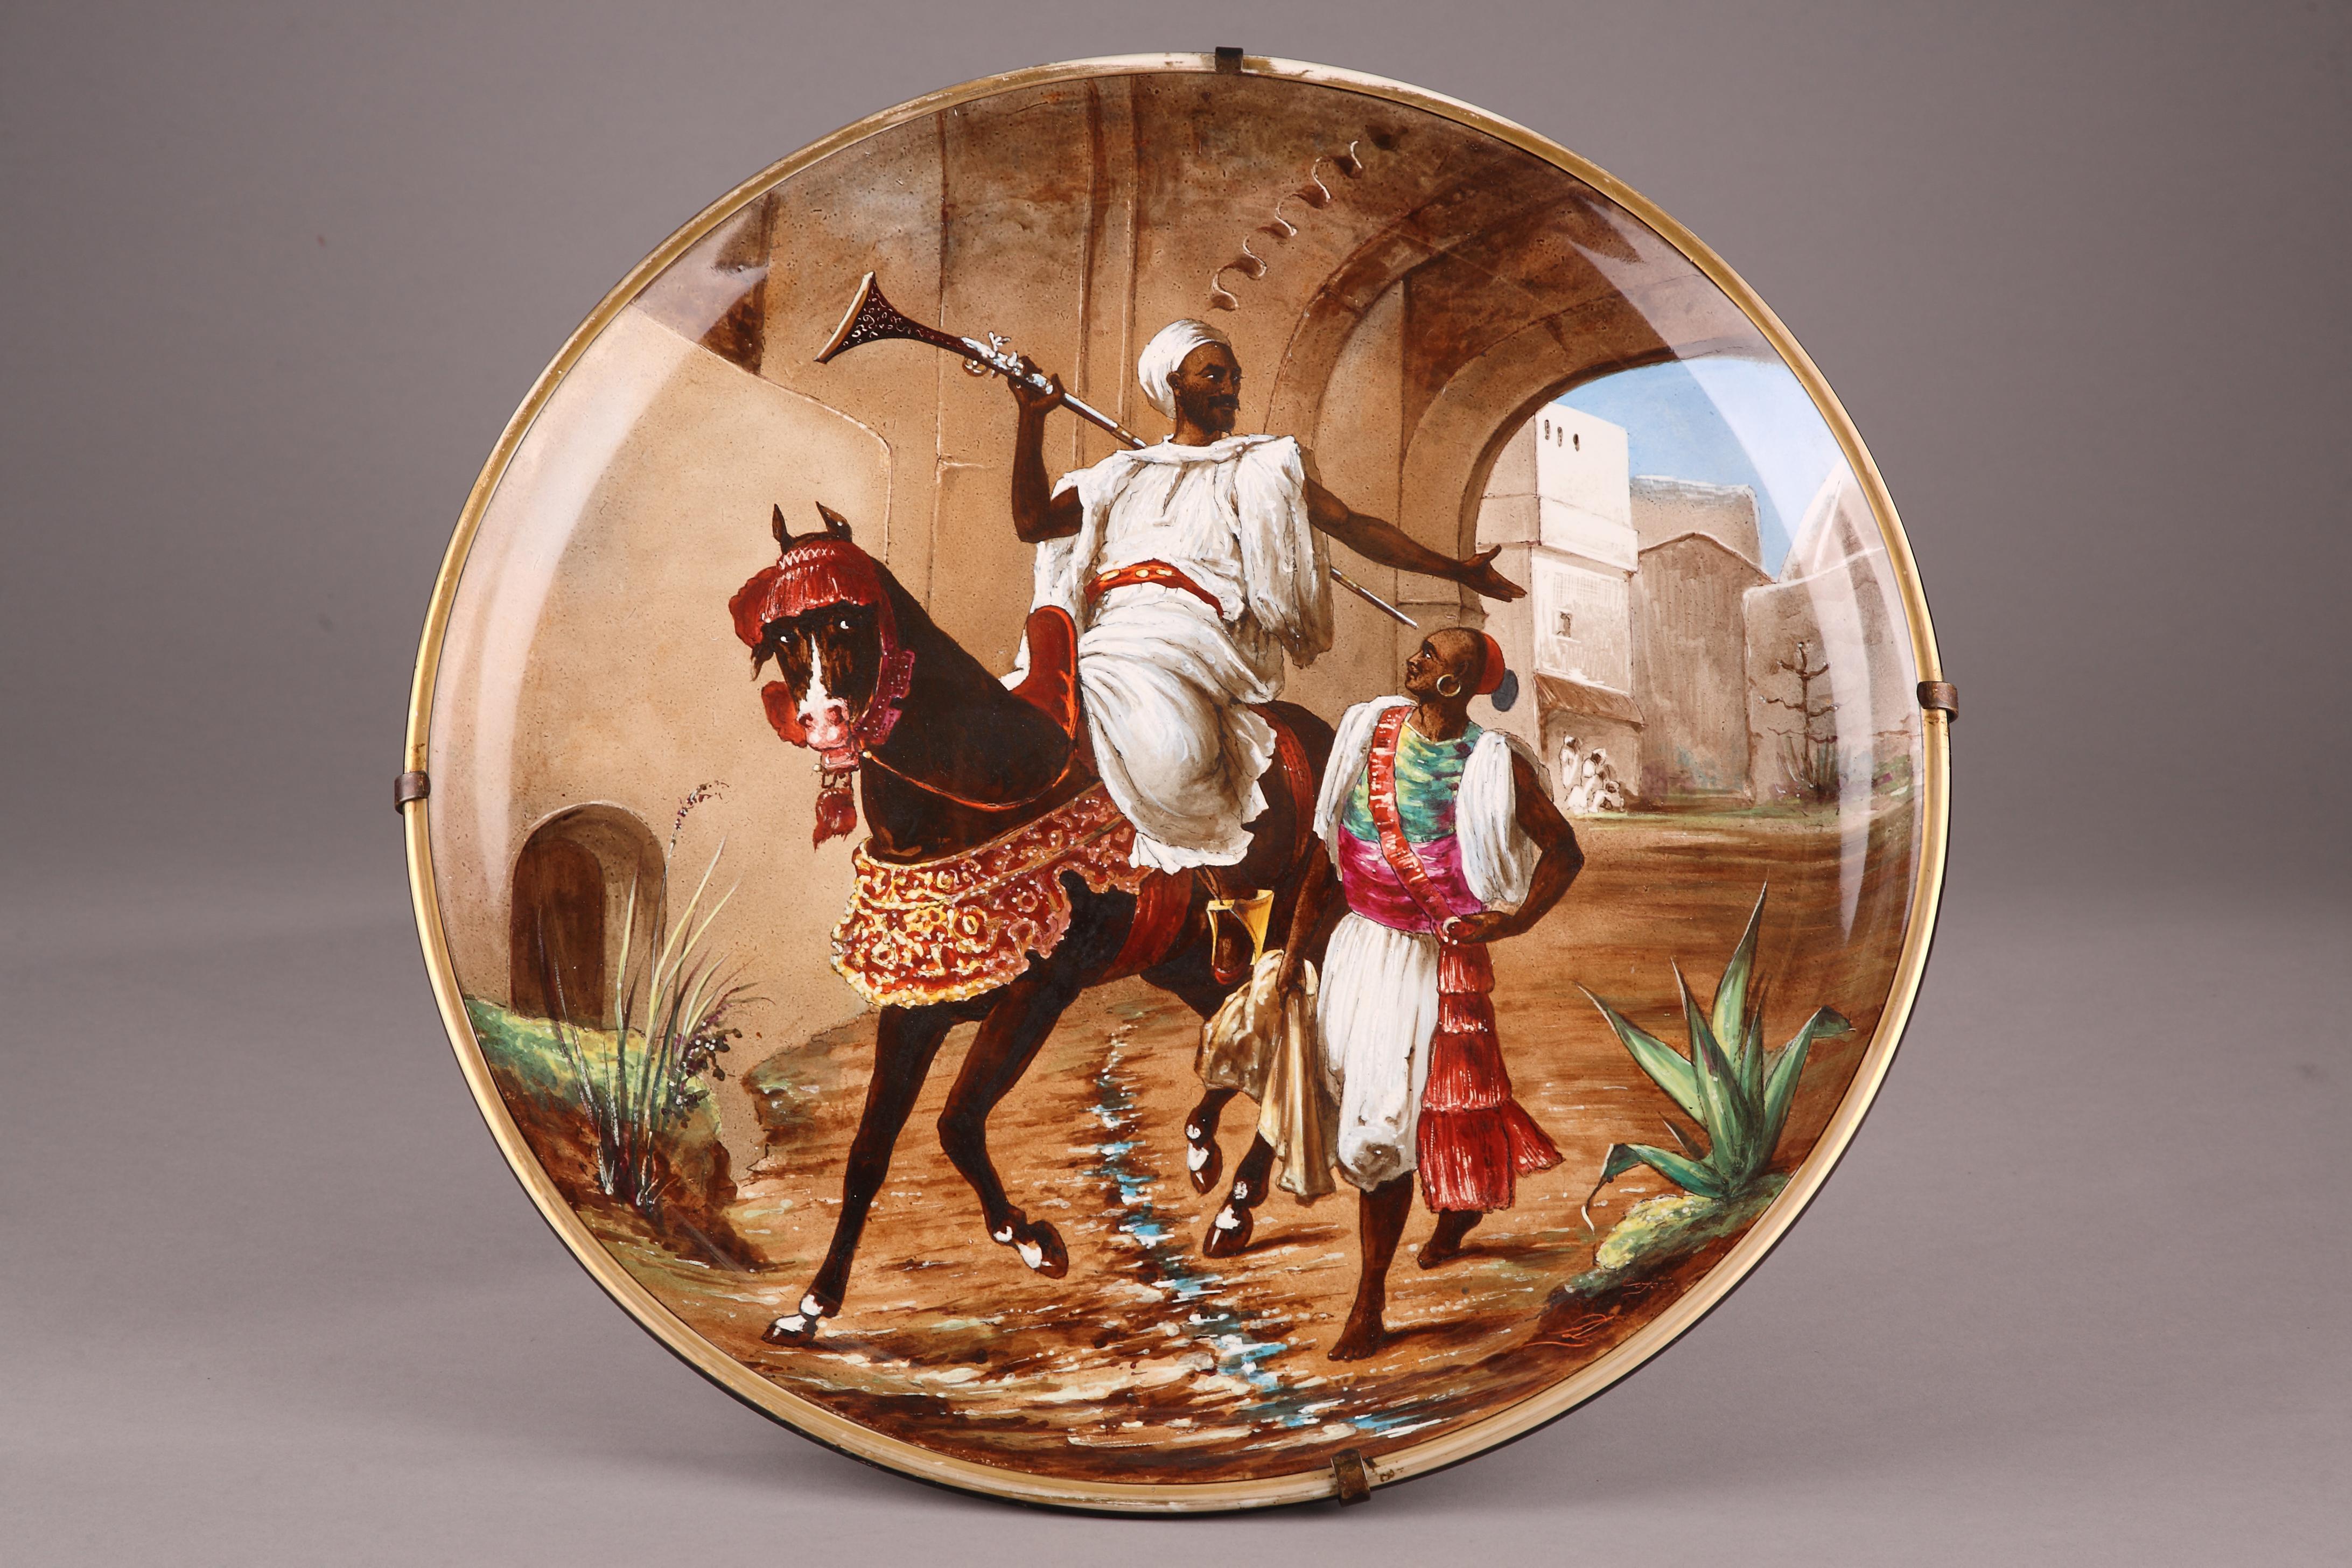 Signed by Cojoie AD, the decor-painter
and on the reverse, LM et Cie, the making mark of the manufacture

A circular hand painted pottery charger, decorated with an orientalist scene depicting an Arab ridder and his servant getting out of a town.